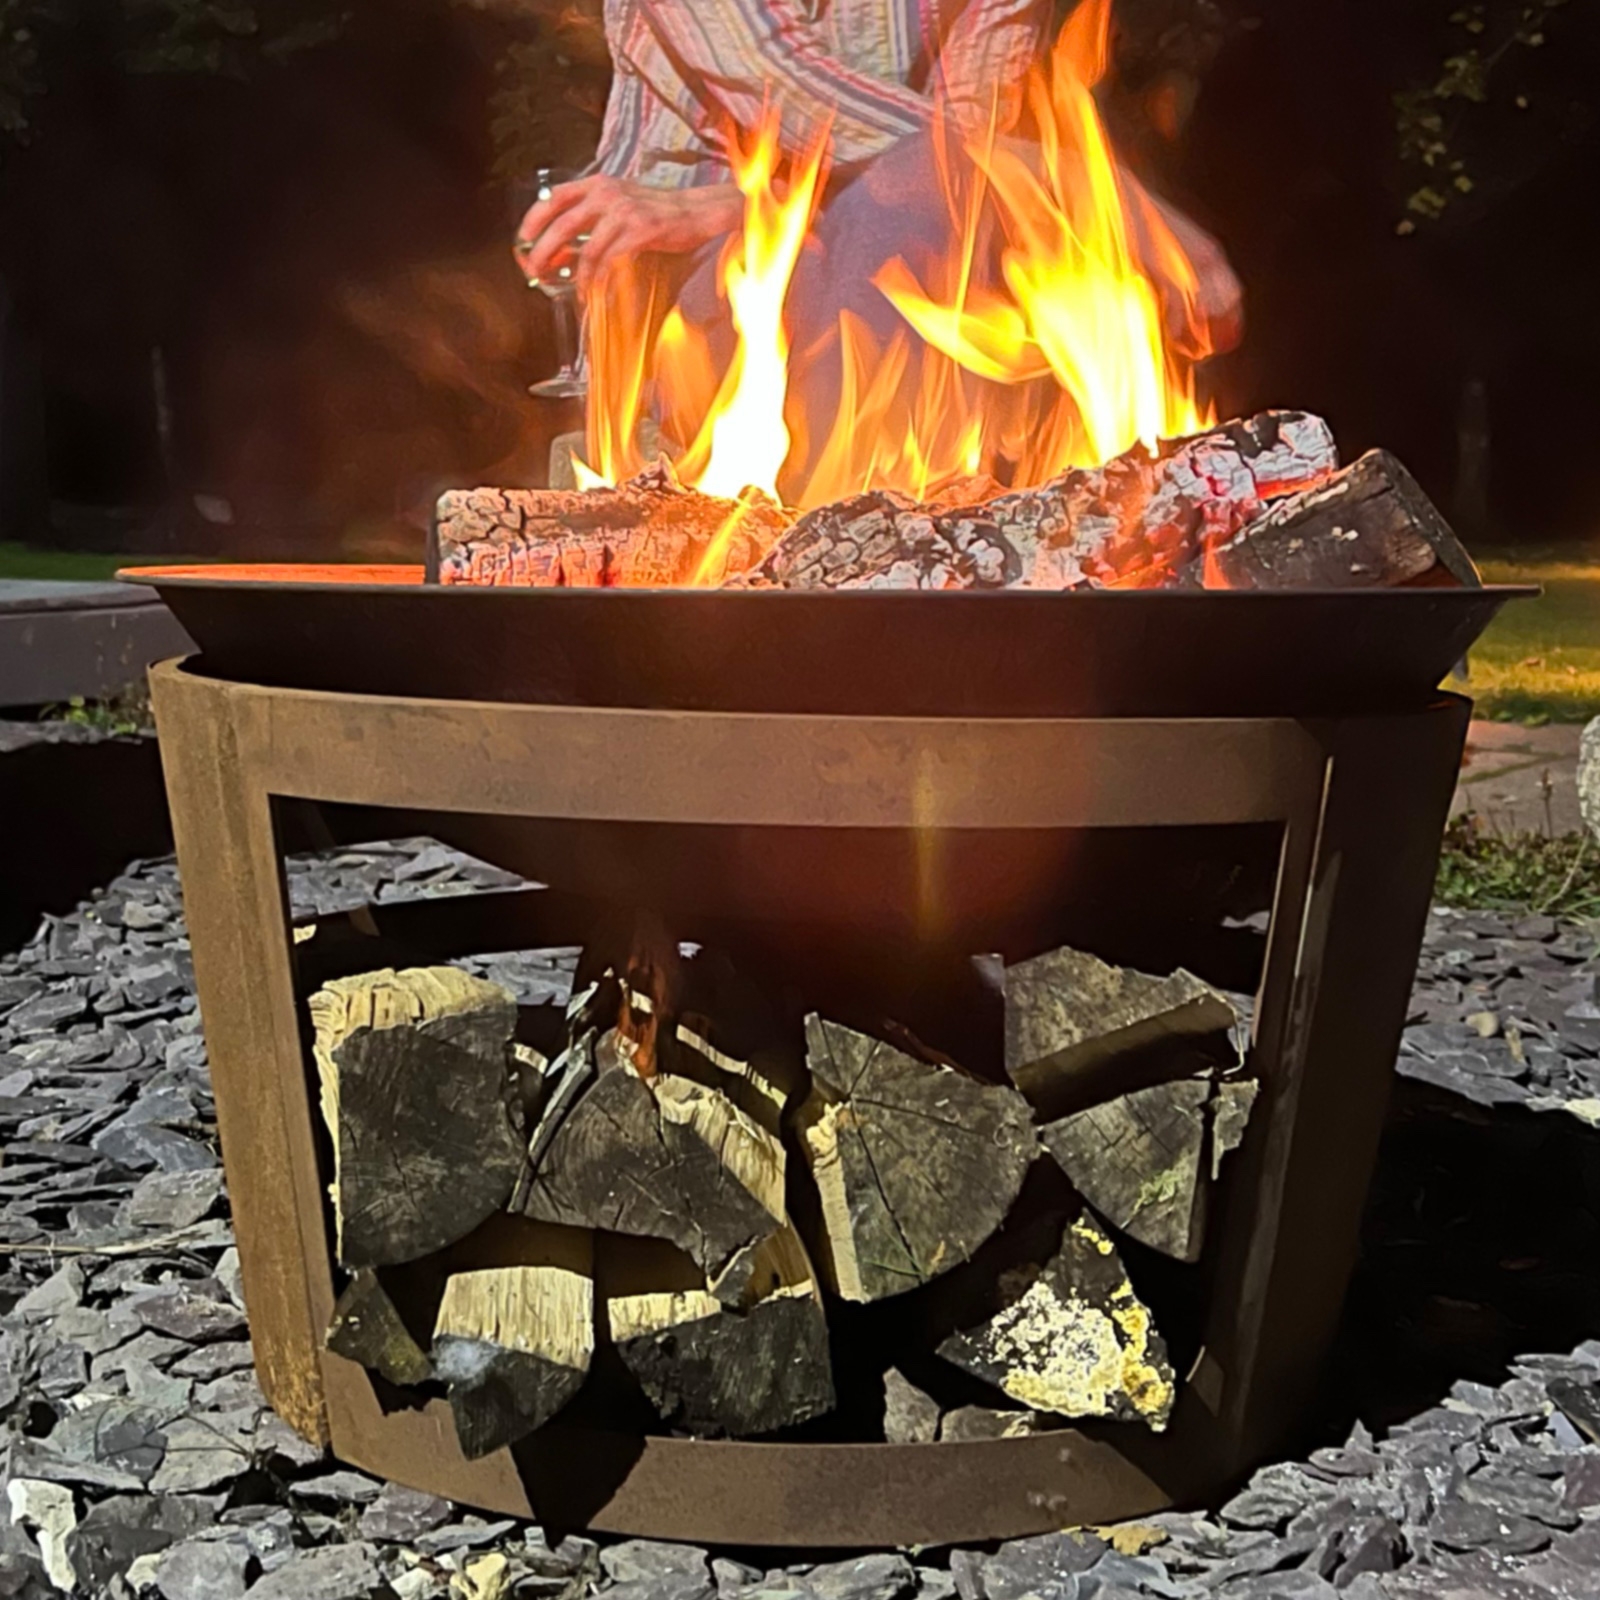 Apollo Oxidised Fire Pit And Bbq Grill, Patina Fire Pit Covers